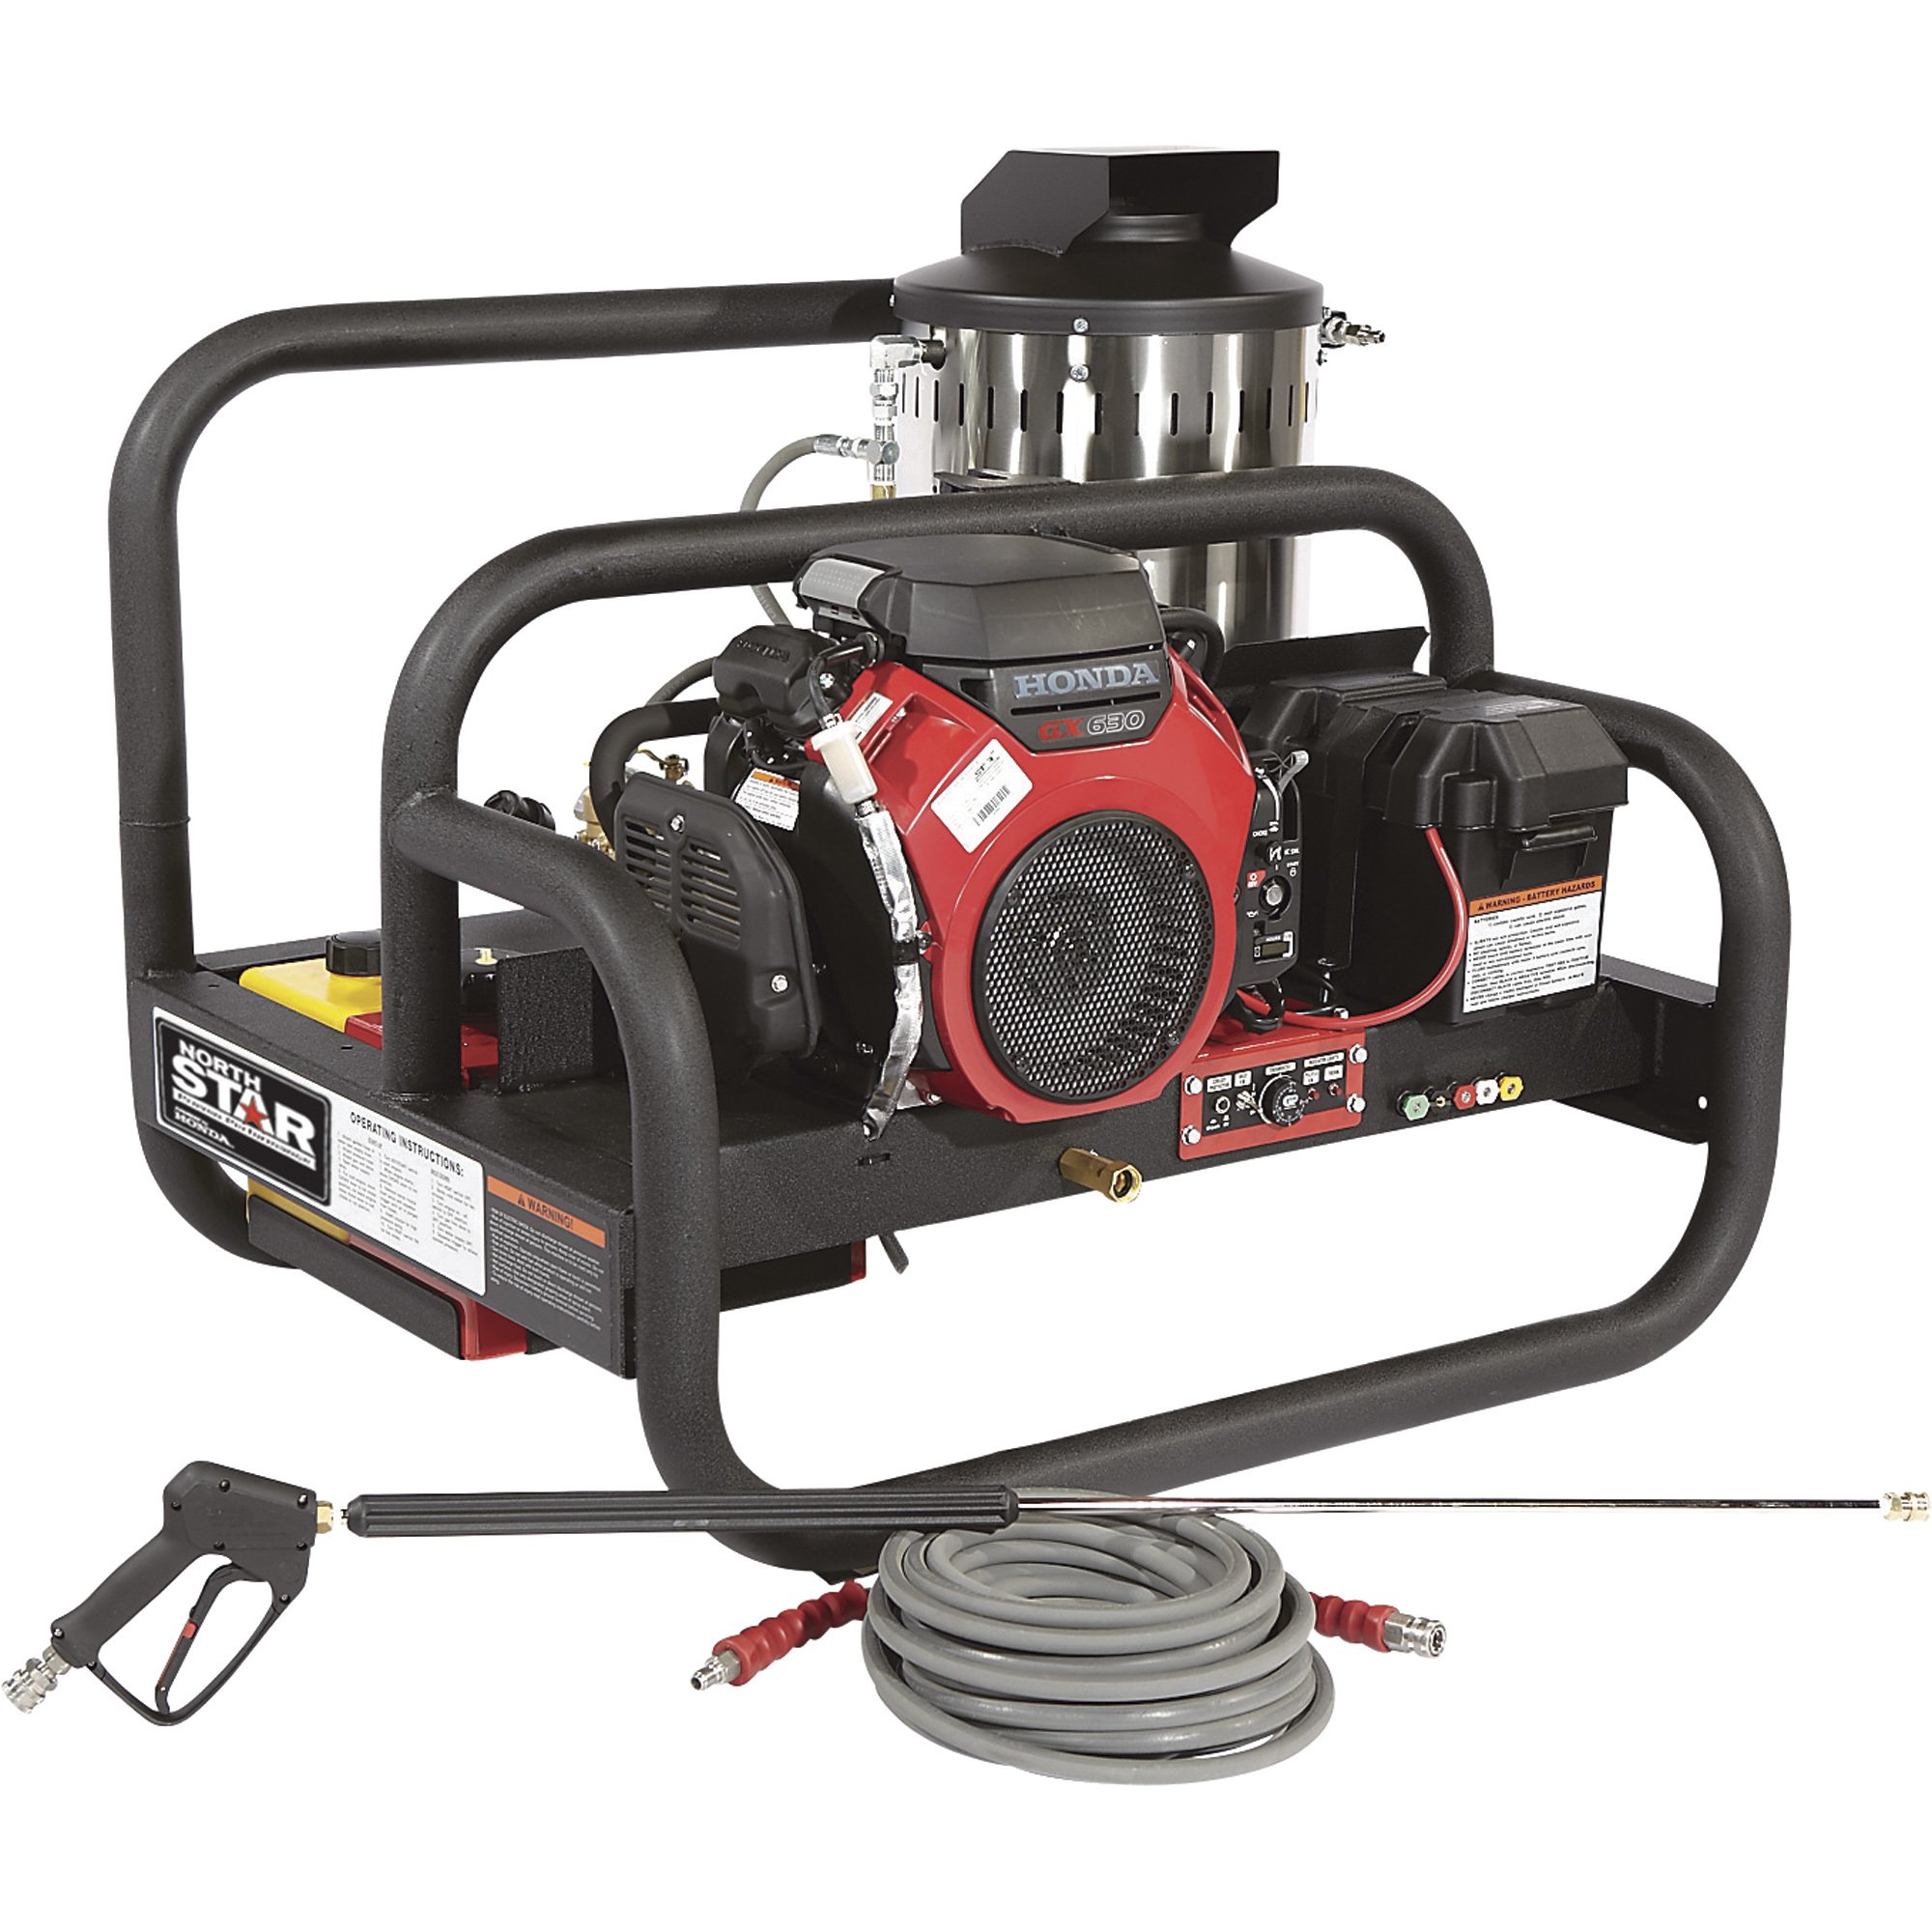 For Sale in California Only — NorthStar Gas Hot Water Commercial Pressure  Washer Skid — 4,000 PSI, 4.0 GPM, Honda Engine